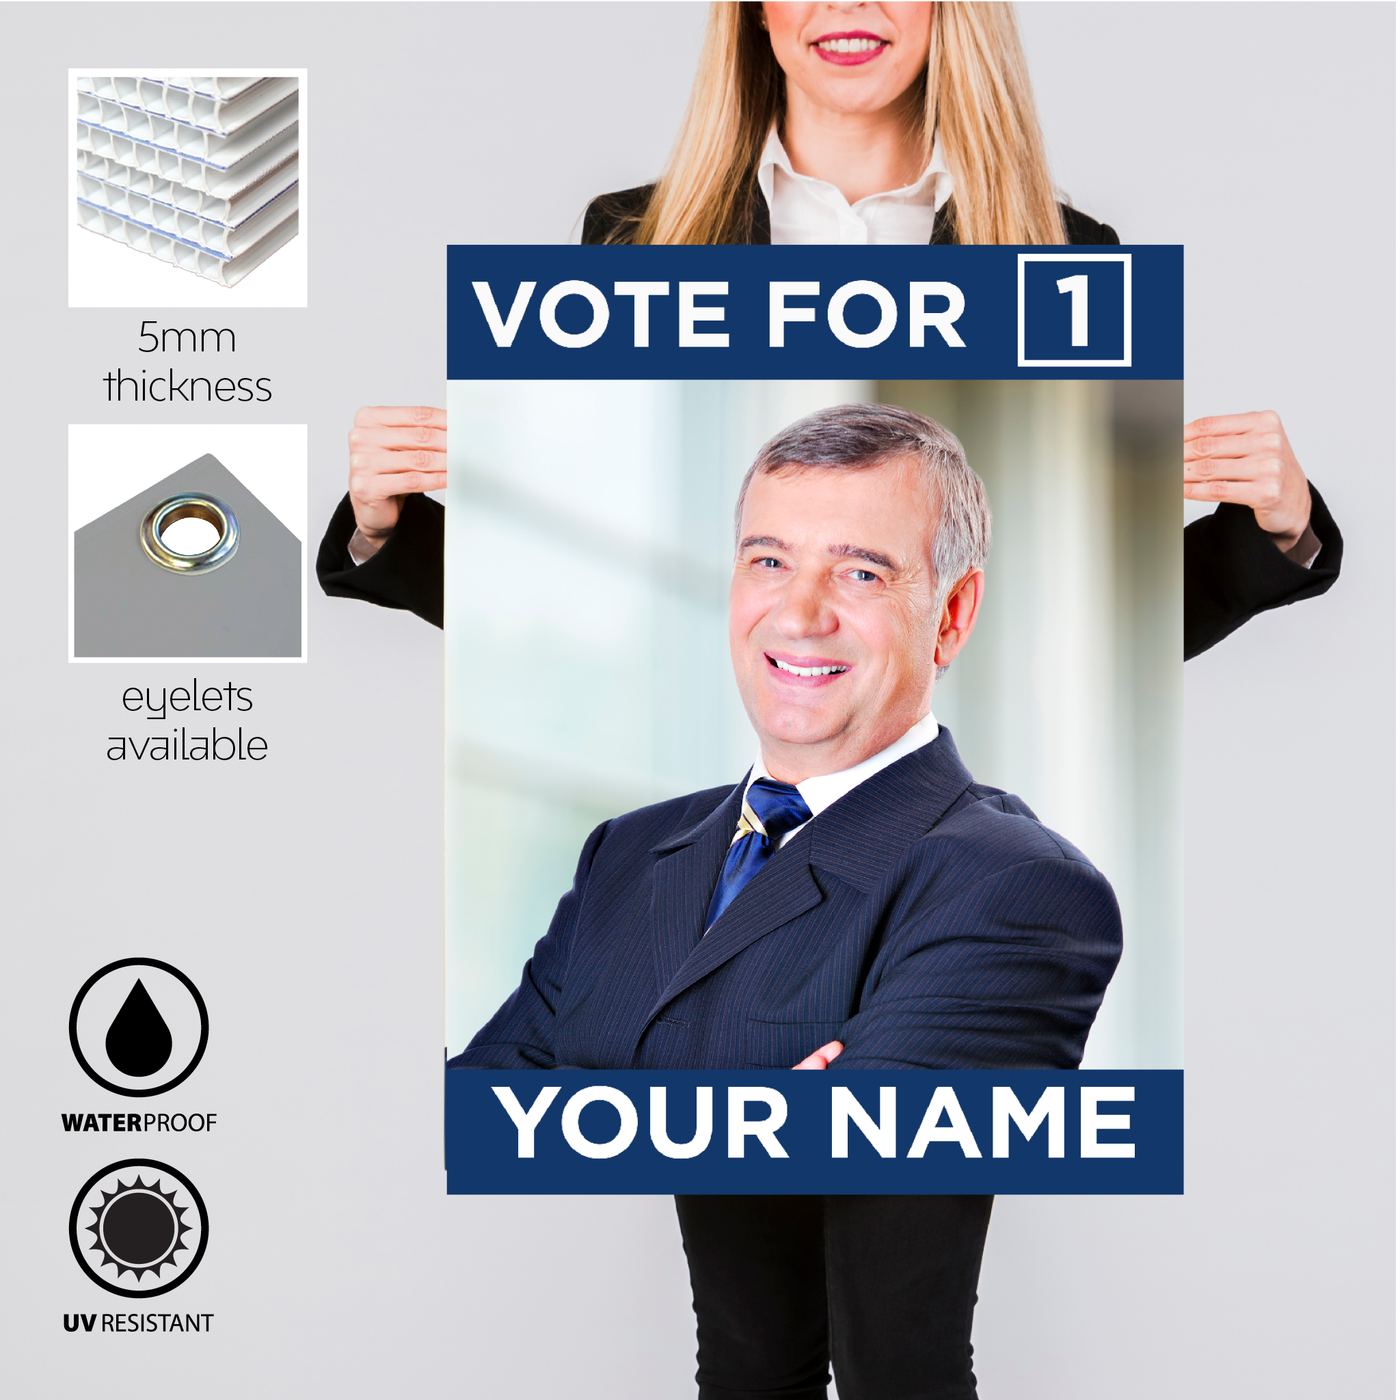 Plastic Election Corflute Signs appx 600x900mm